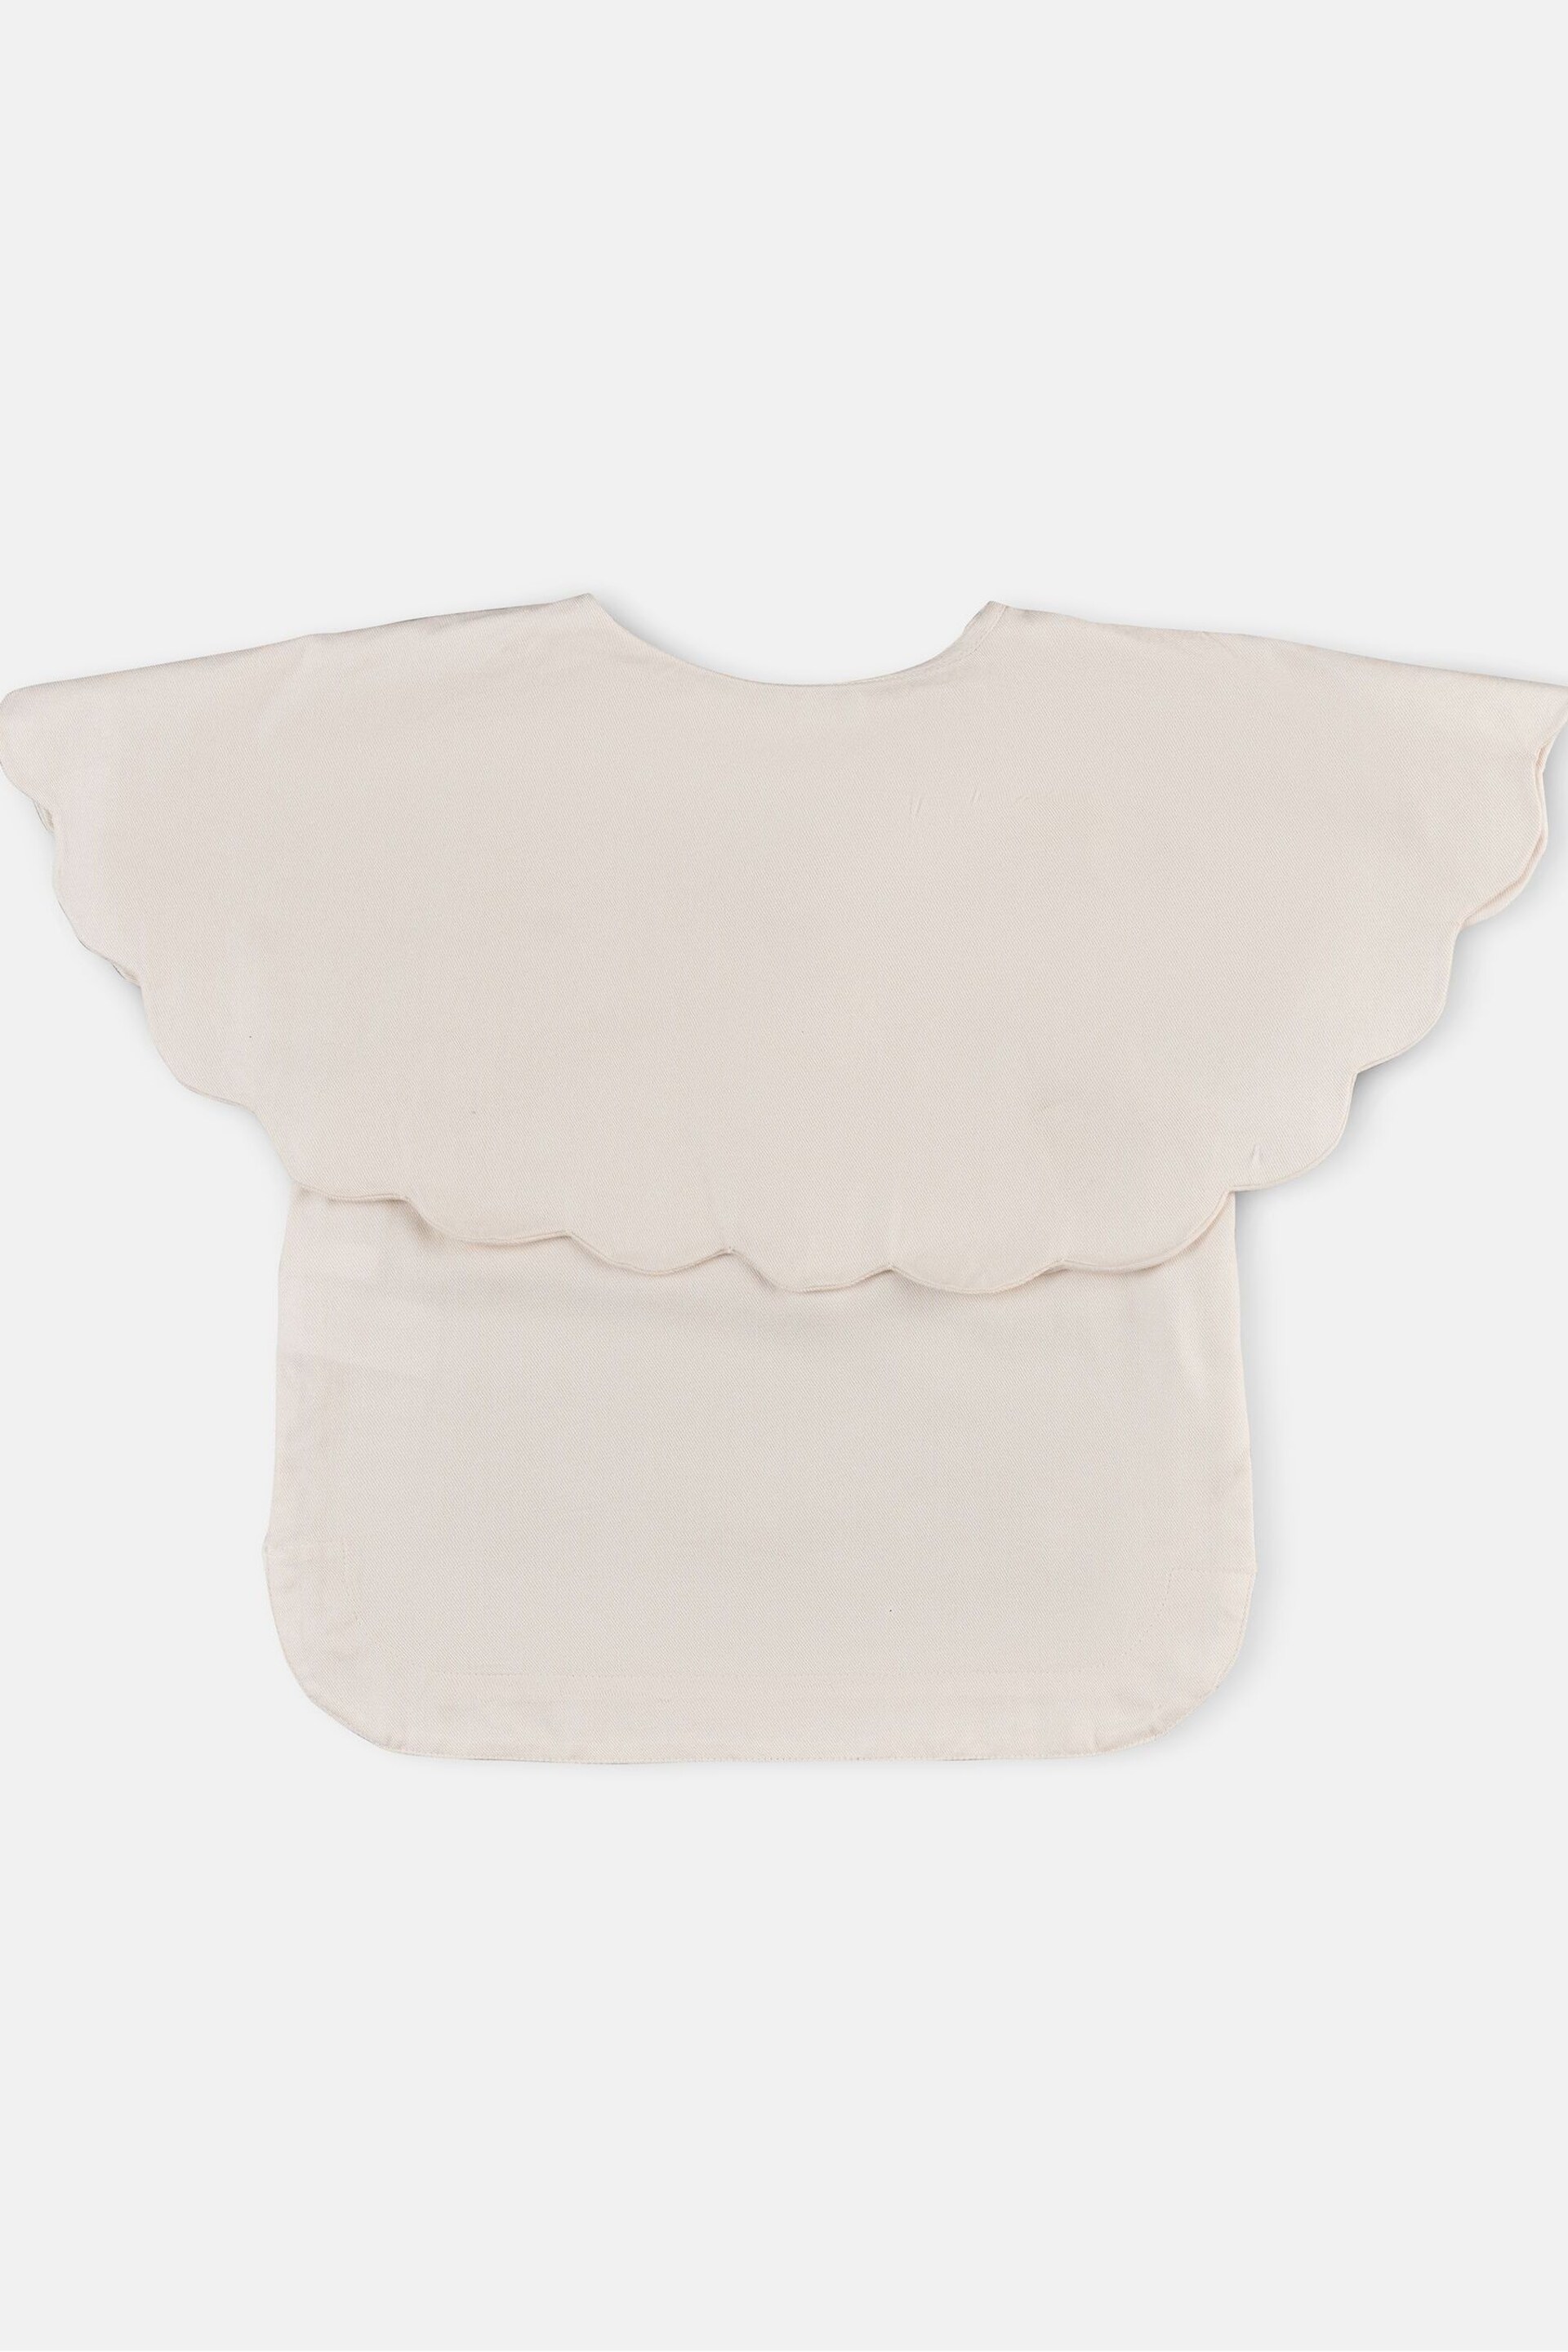 Angel & Rocket Cream Margaux Cape Collar Woven Top - Image 9 of 10